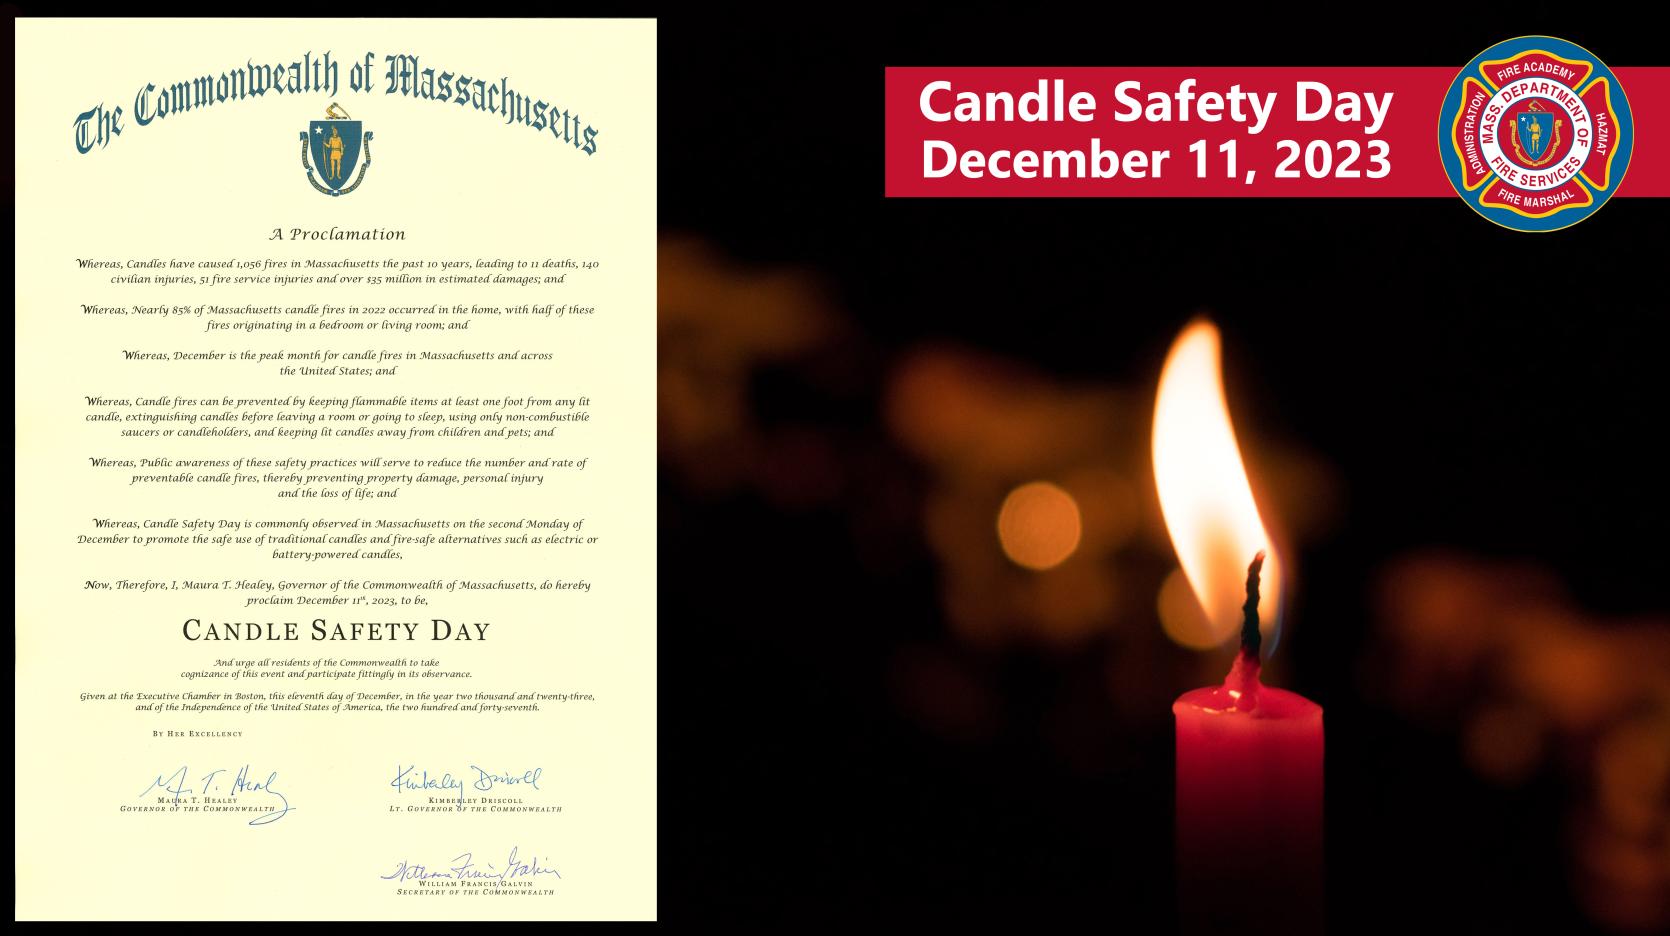 Picture of a candle with the words "candle safety day, december 11, 2023" and an inset of a proclamation from the Governor